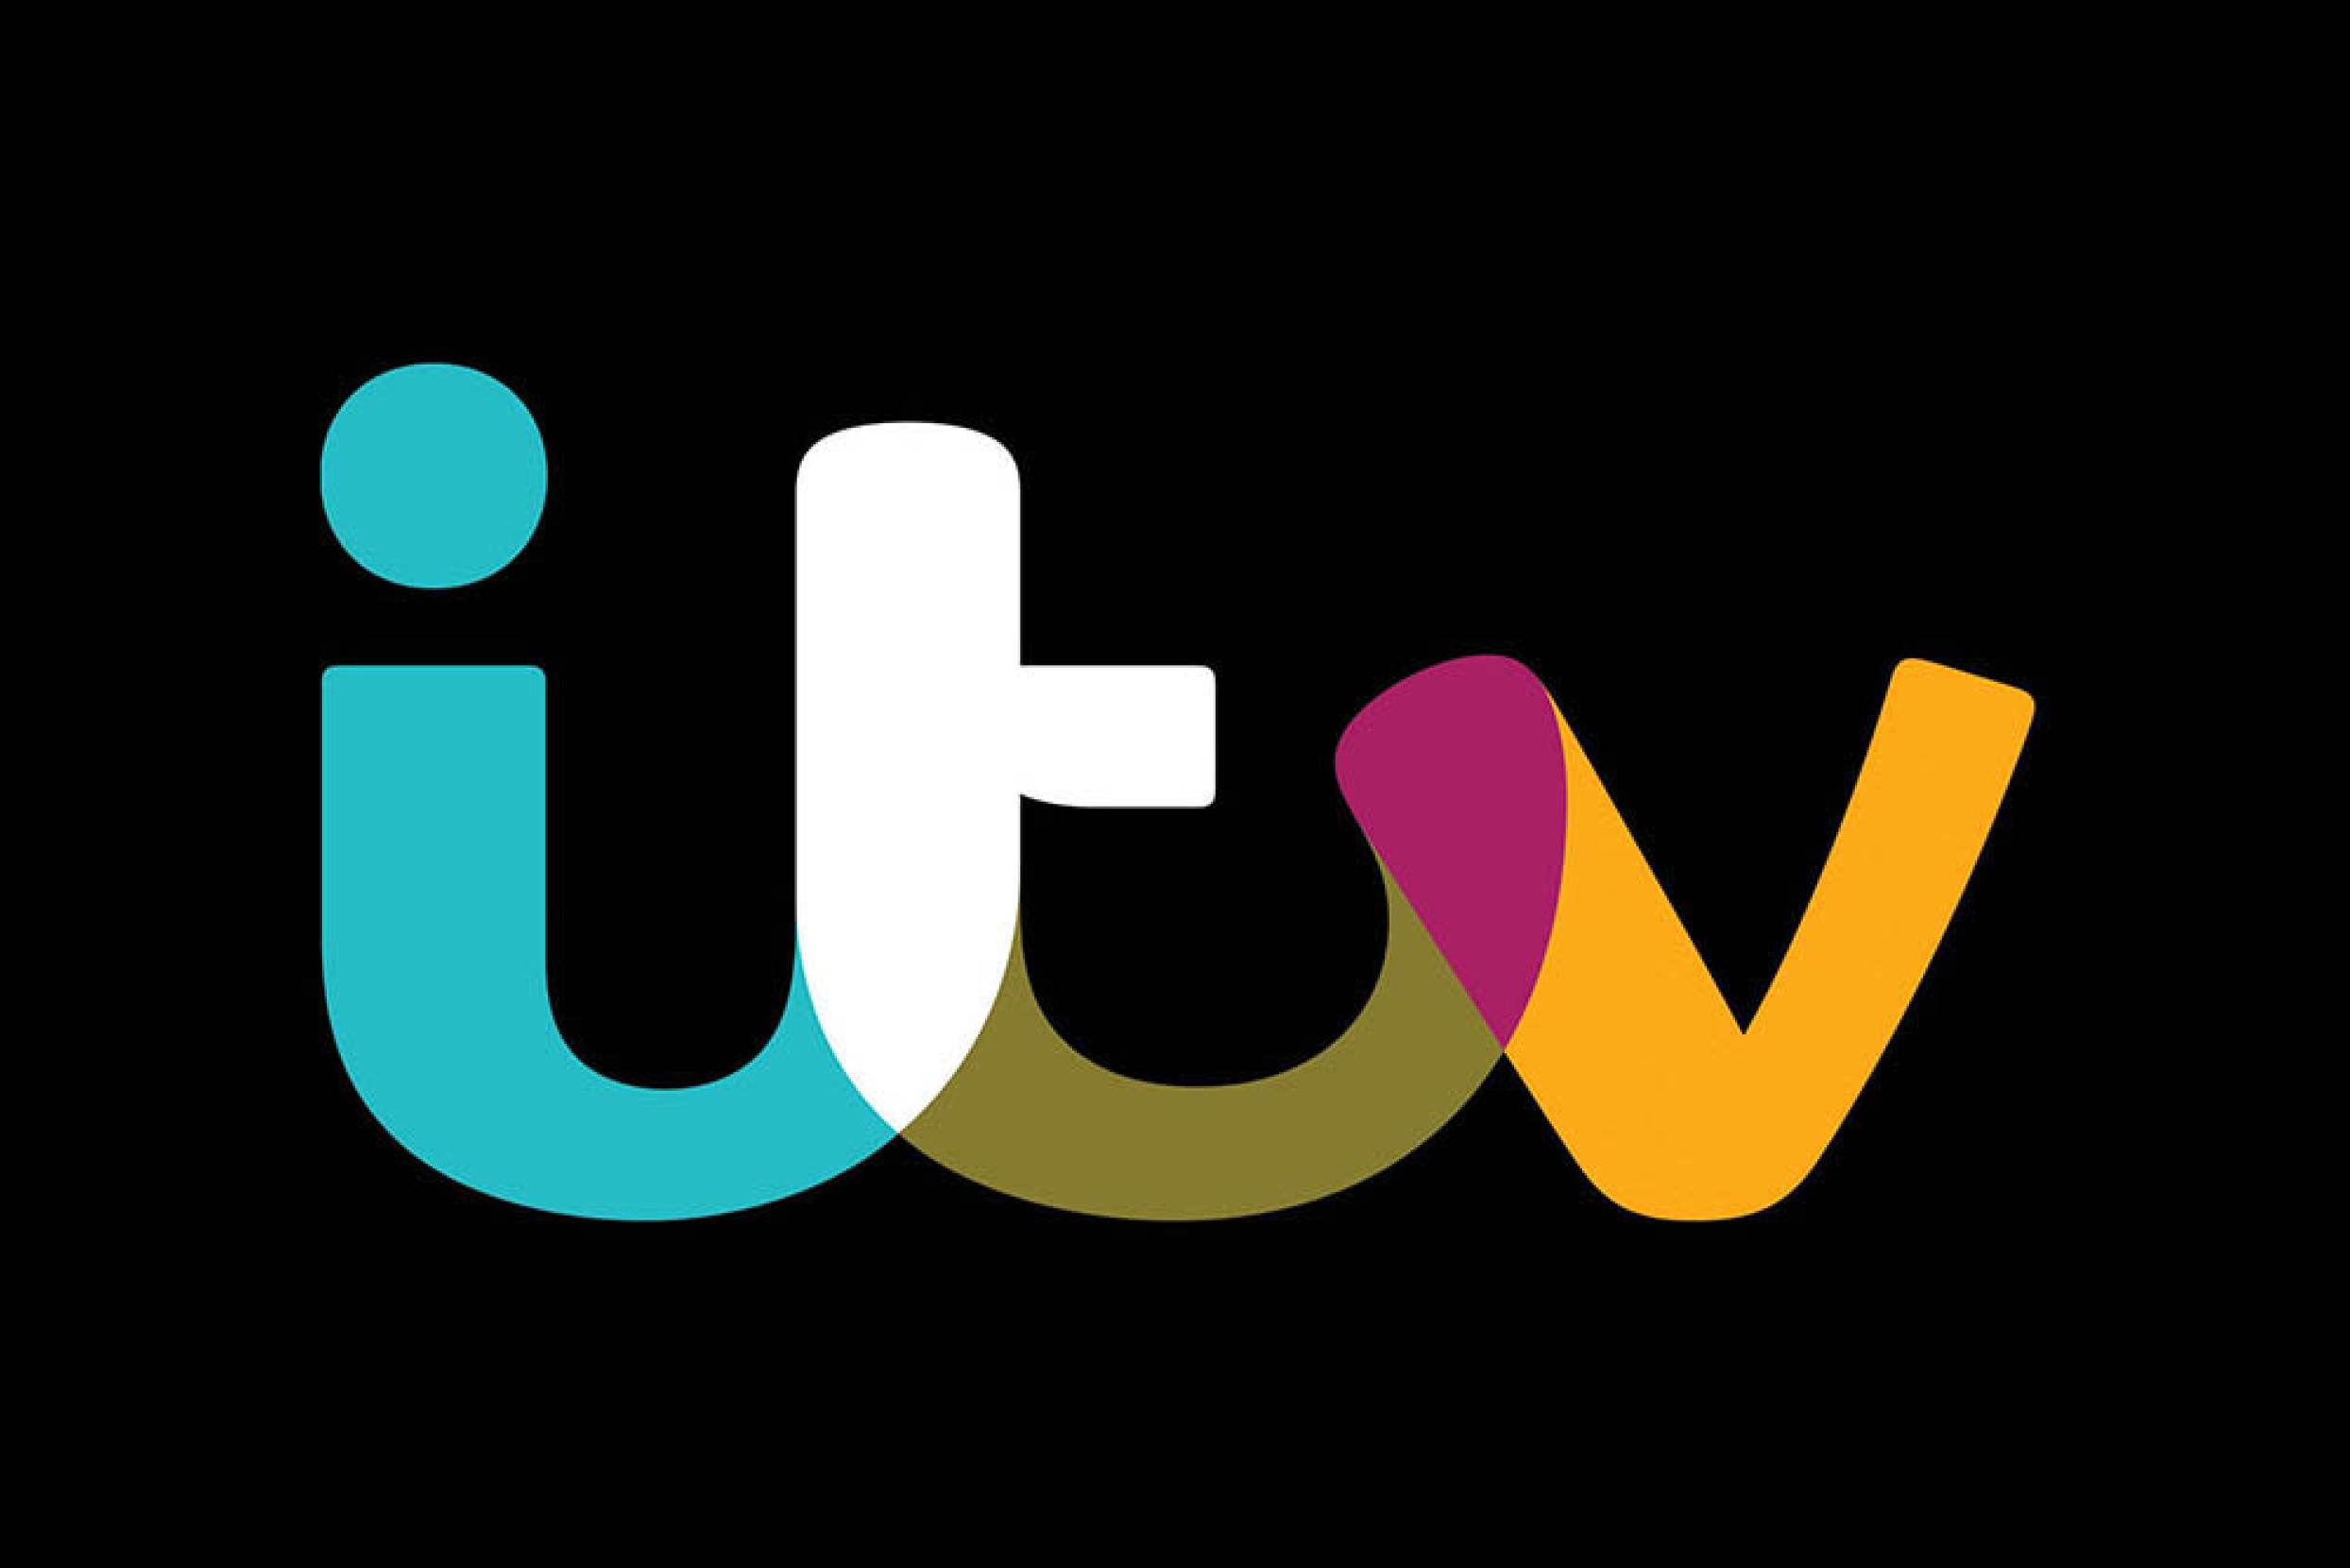 ITV, STV, Sky and INEOS come together to tackle low levels of physical activity in children